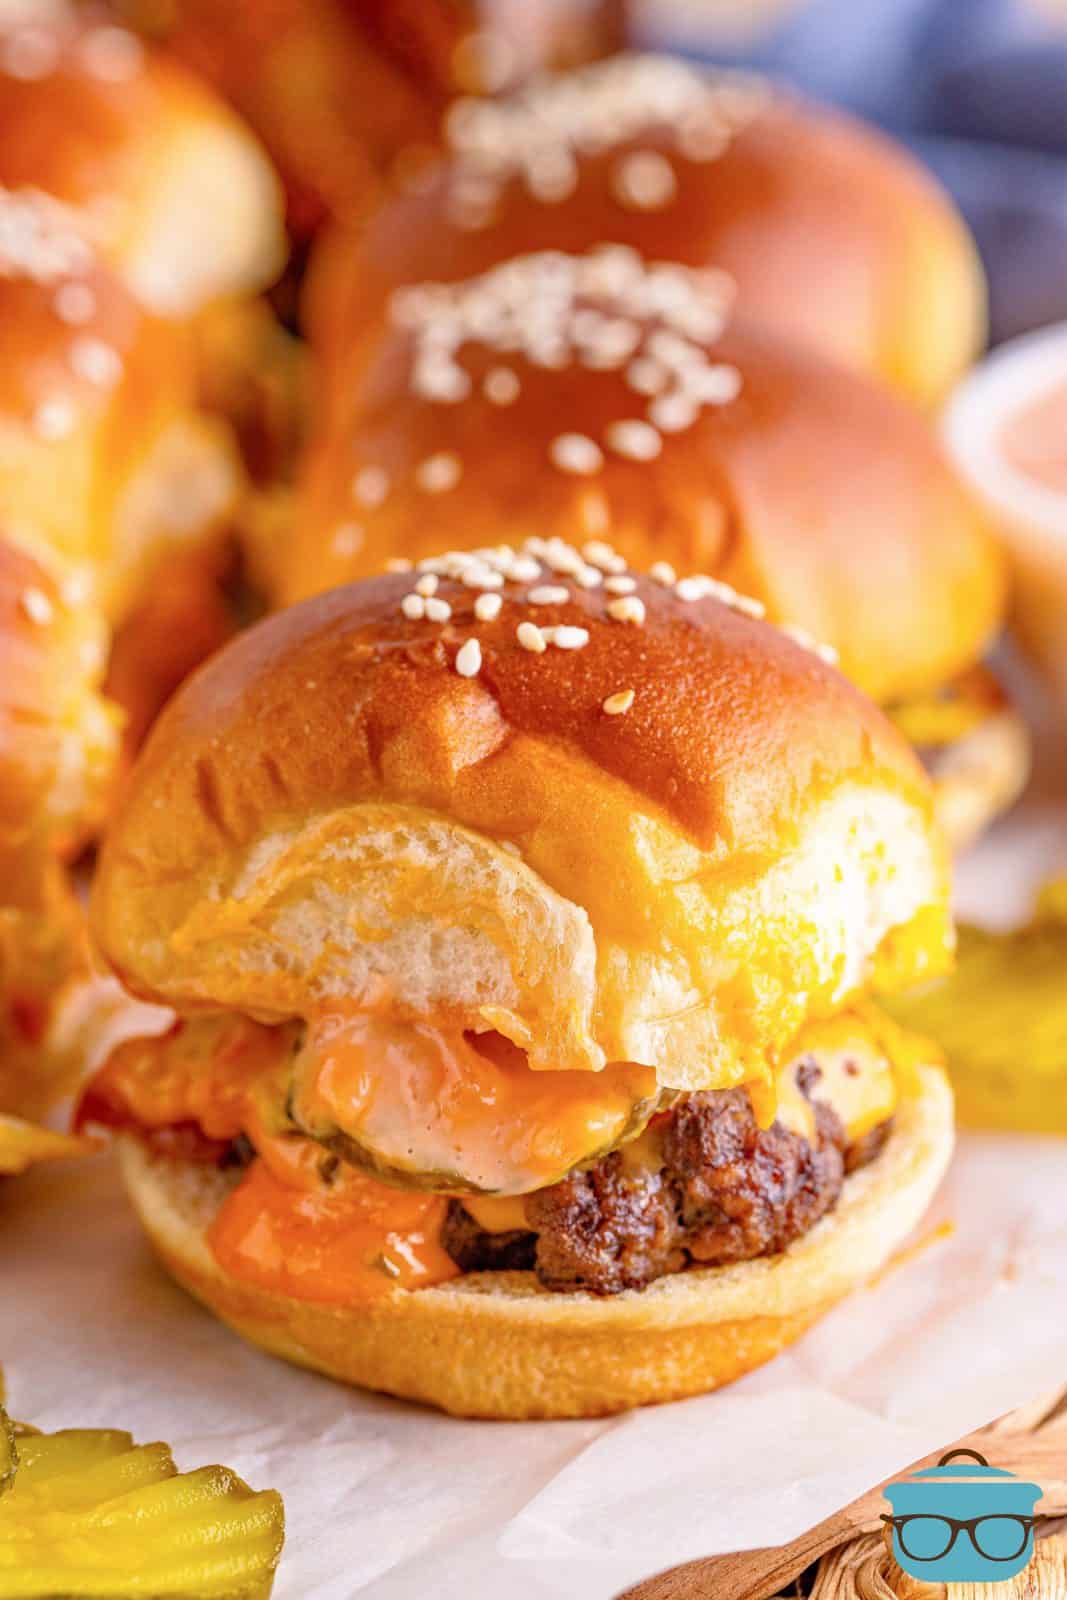 Close up of one Big Mac Slider showing sauce and melted cheese.